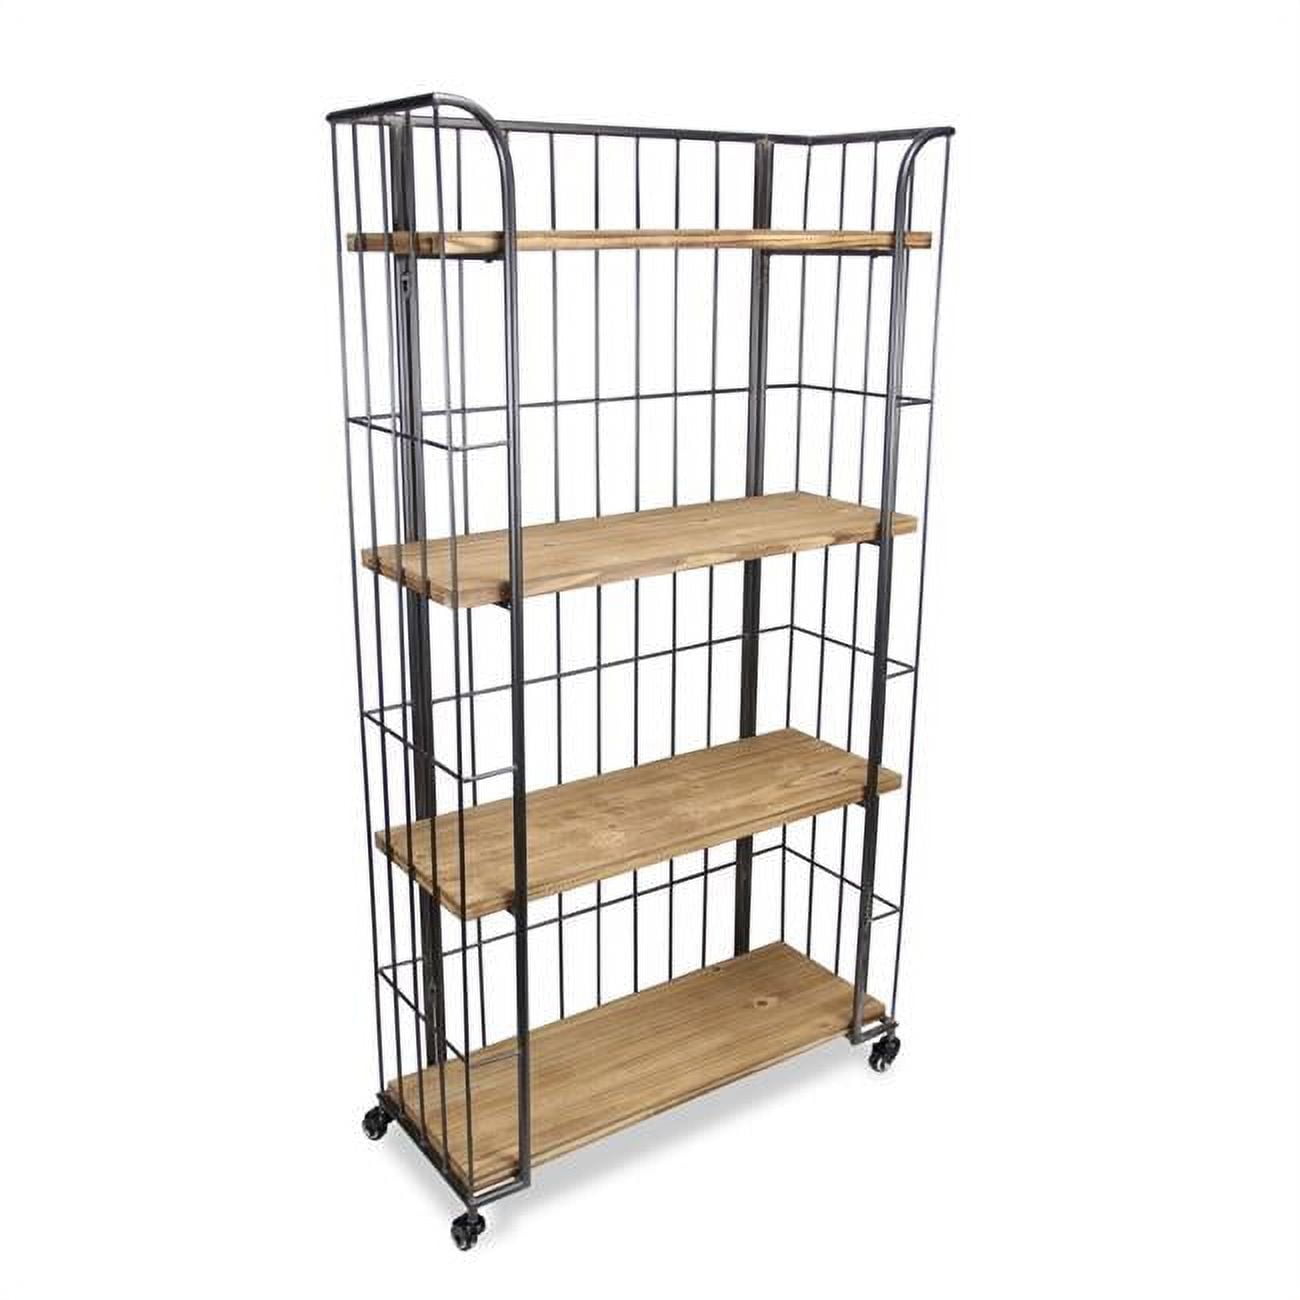 5384 4 Tier Organizer Cart With A Finished Steel Frame - Dark Gray